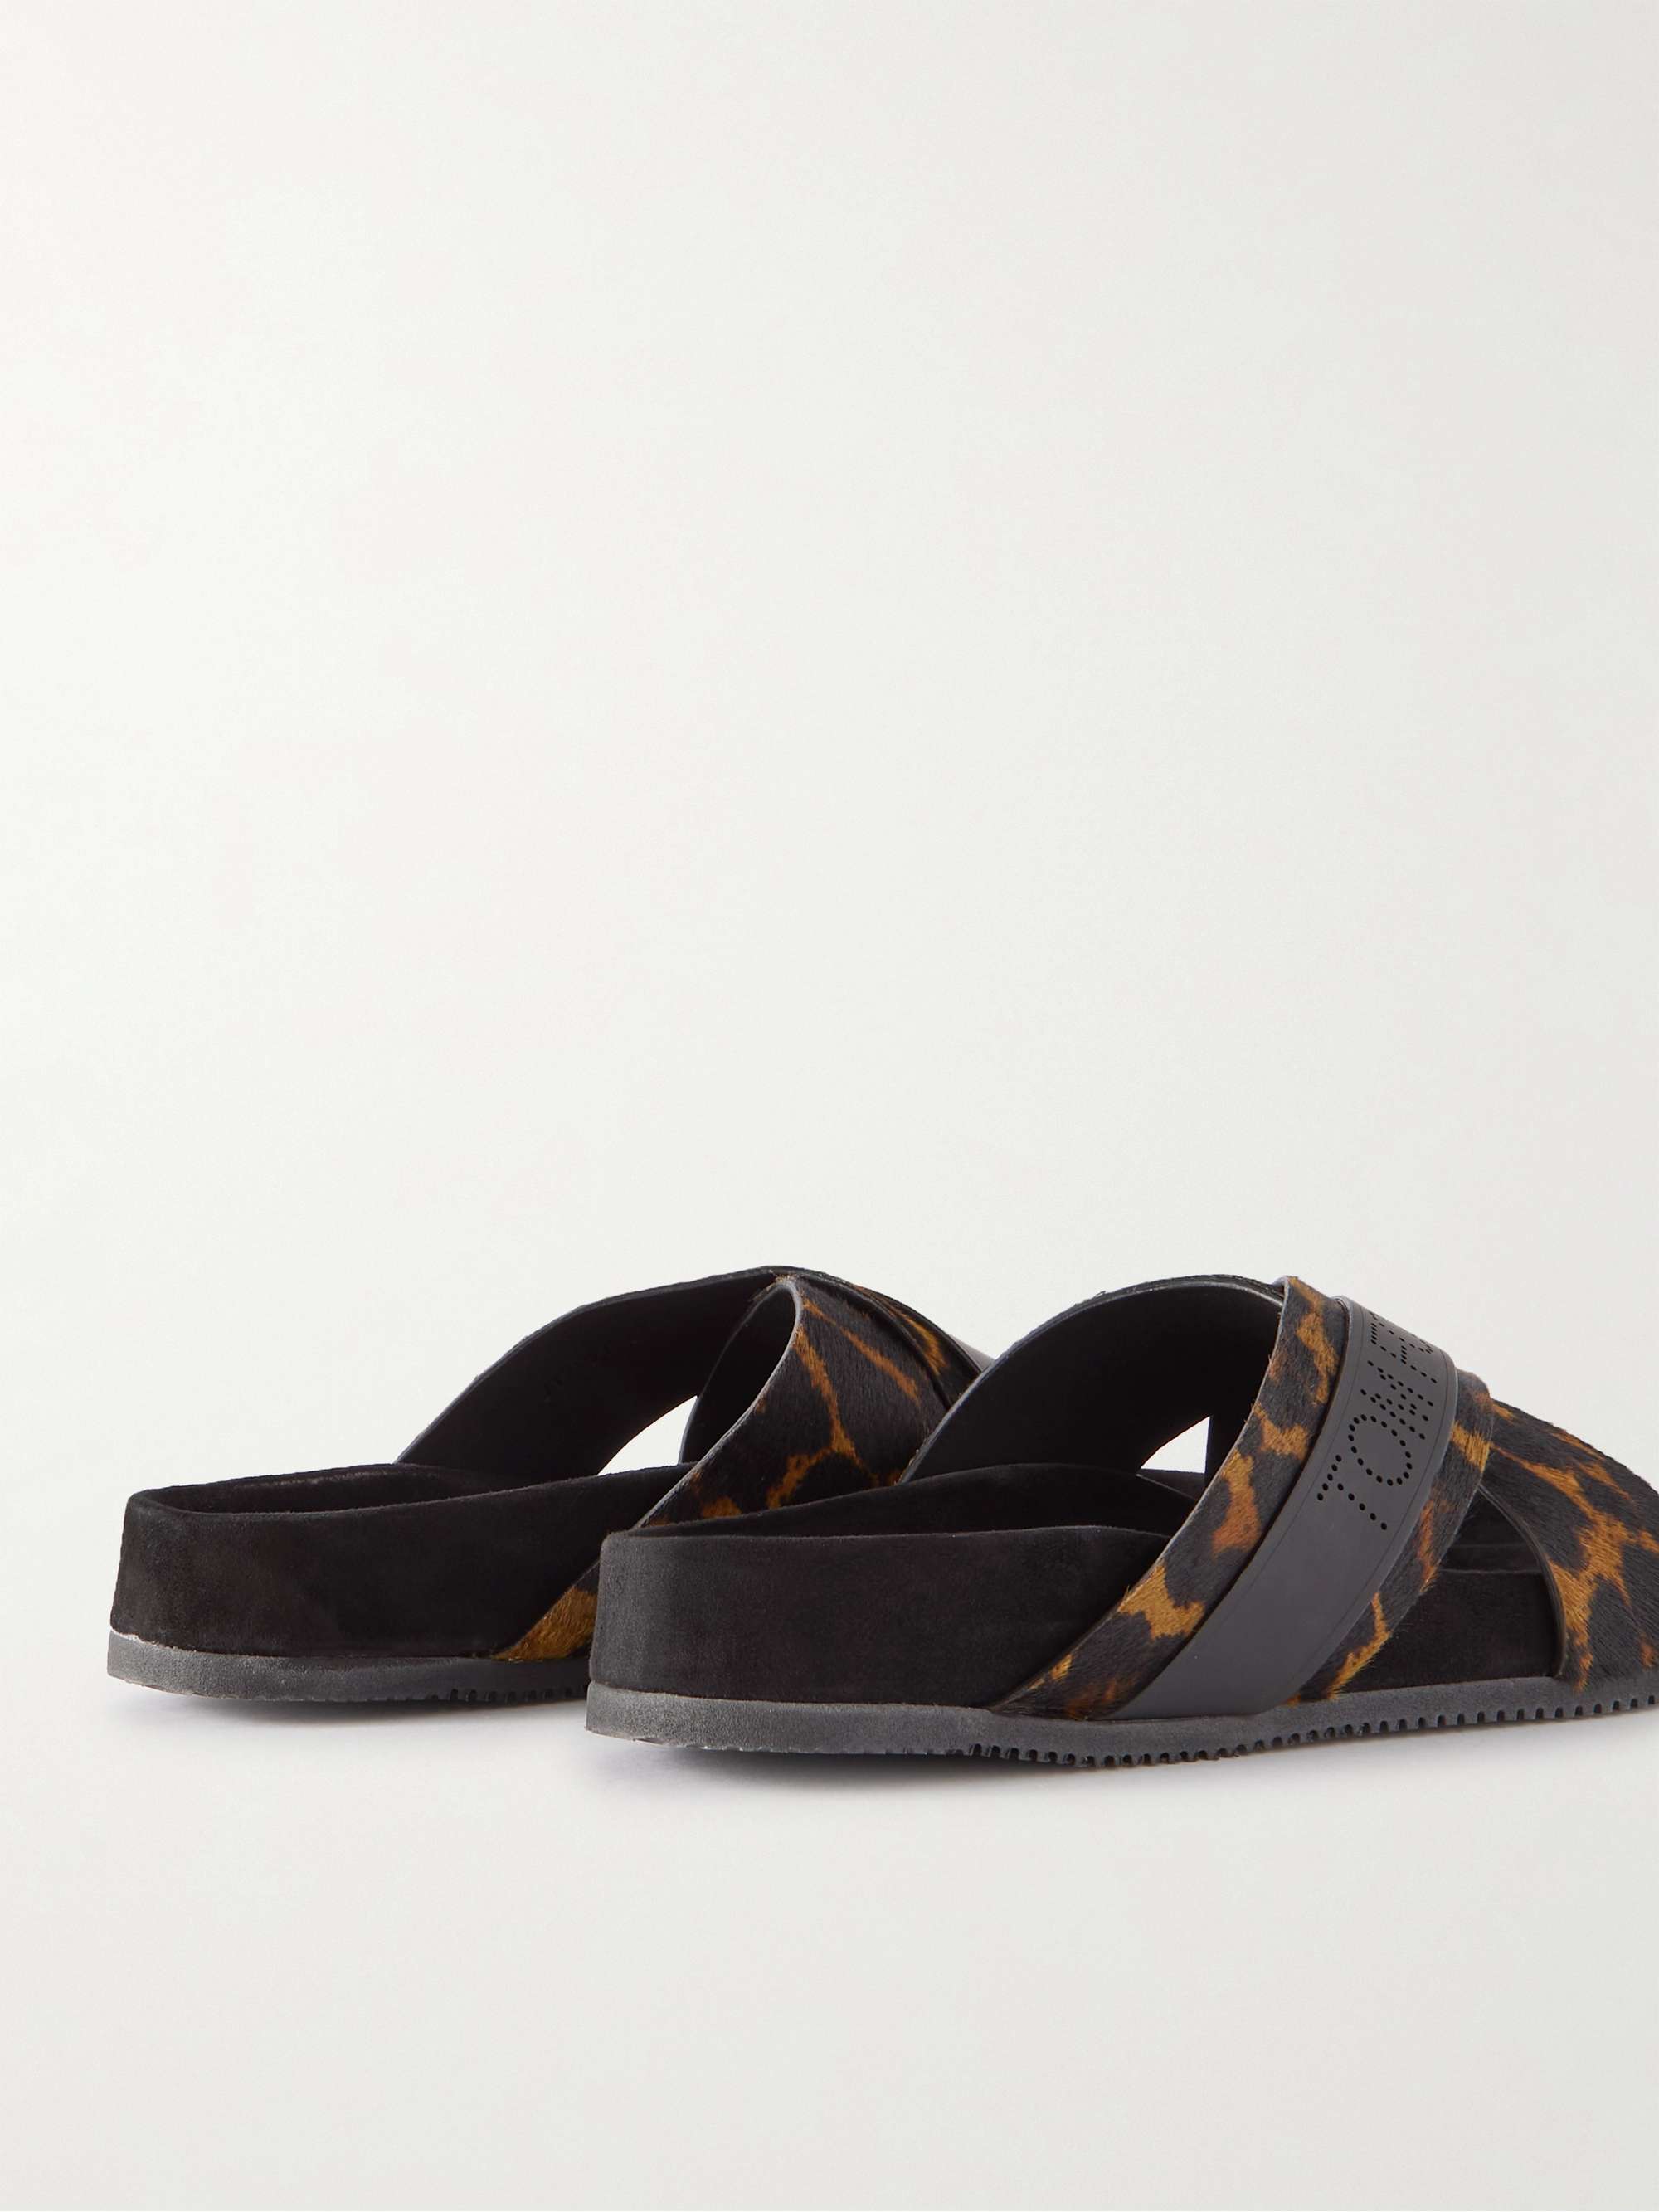 TOM FORD Wicklow Leopard-Print Calf Hair and Leather Slides